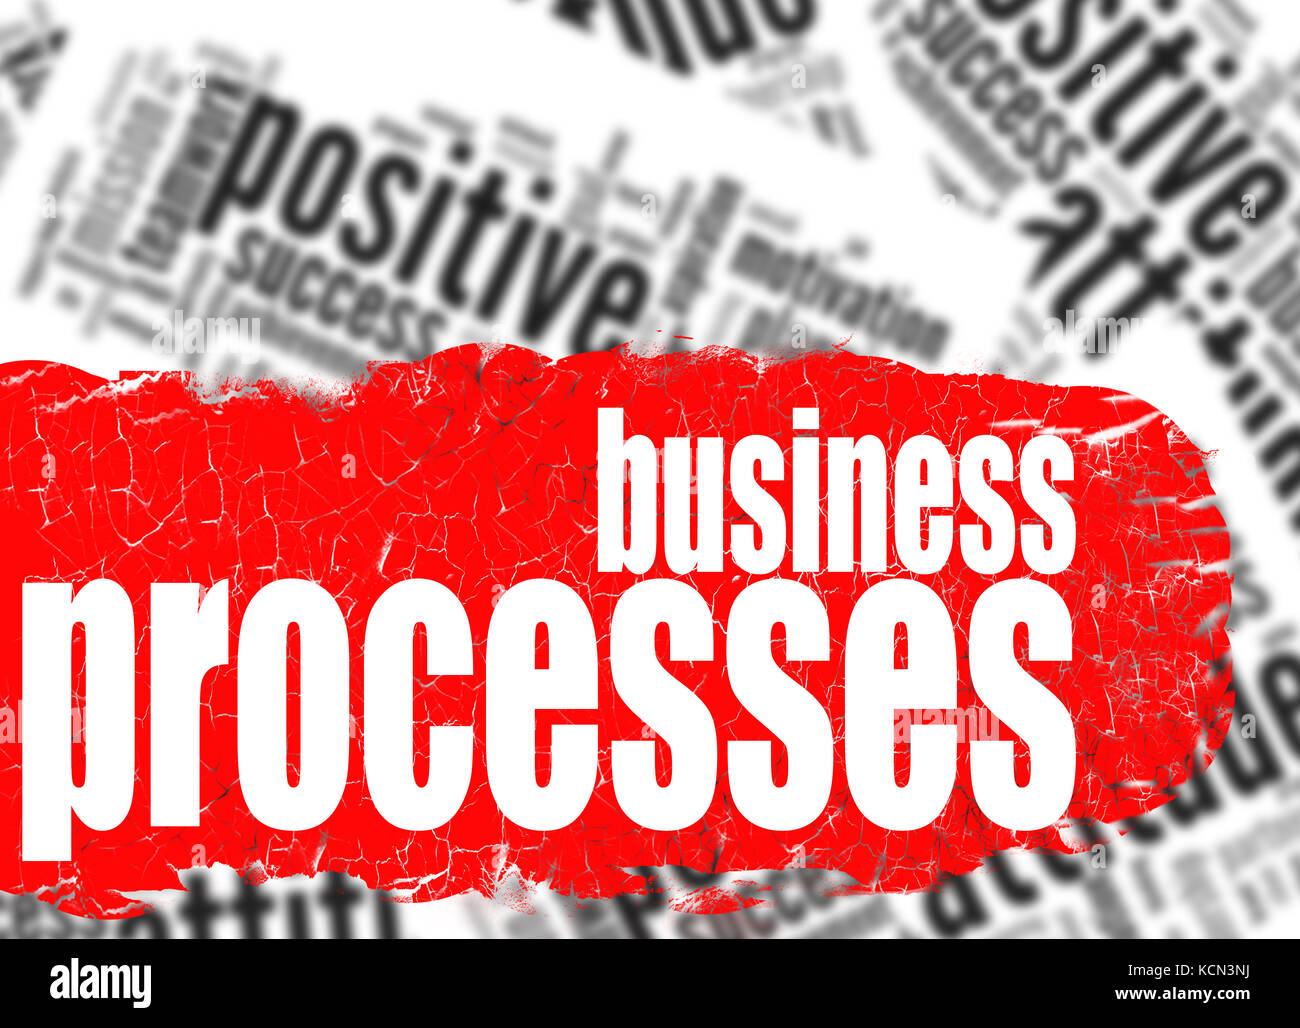 Word Cloud Business Processes Image With Hi Res Rendered Artwork That Could Be Used For Any 1296